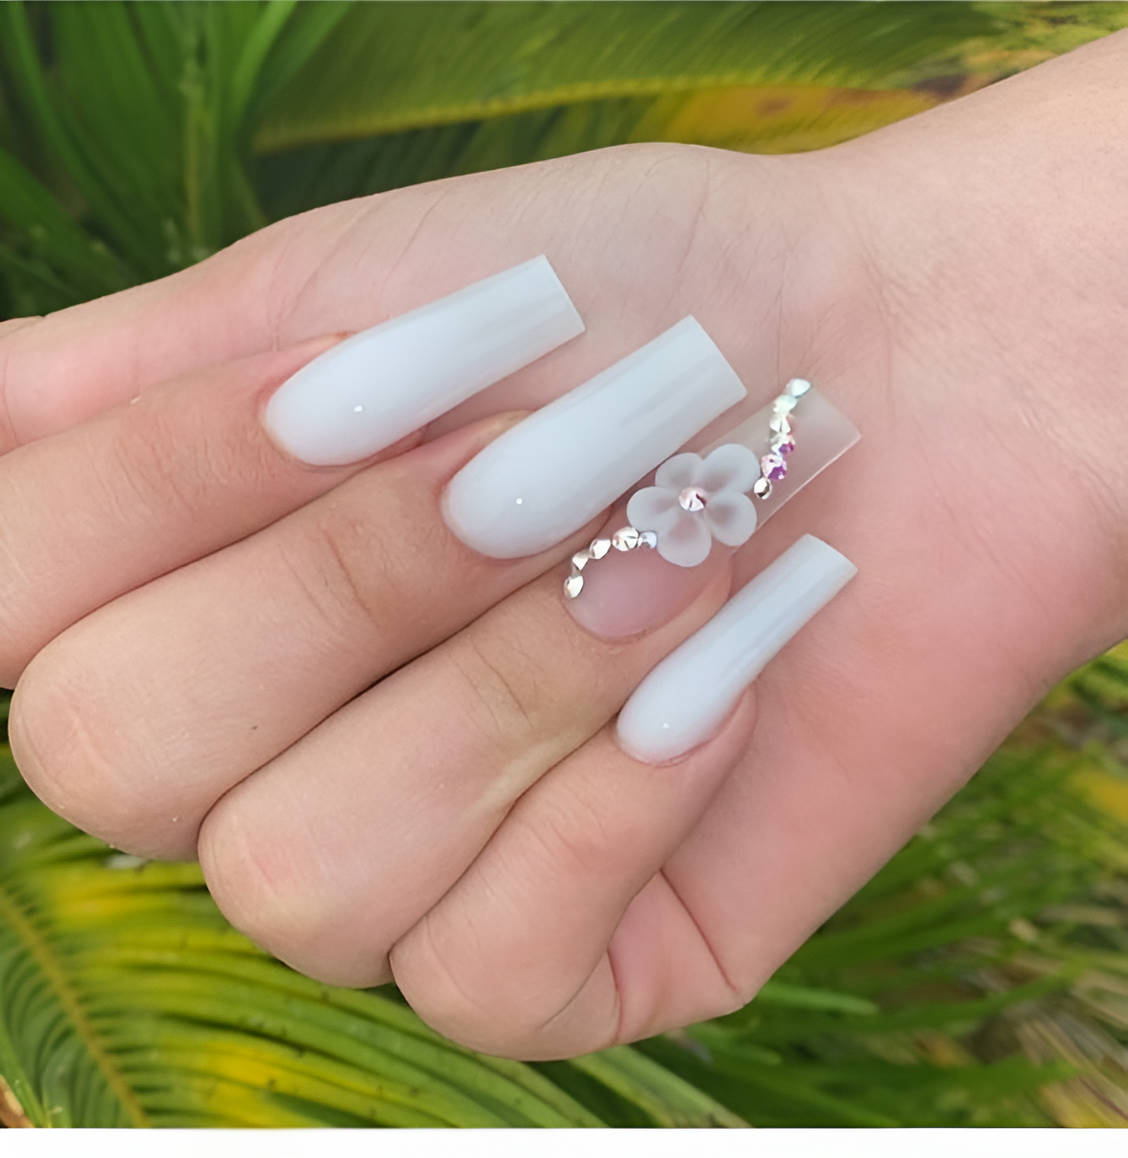 Discover 30 glamorous white nail designs that will make you the center of attention.